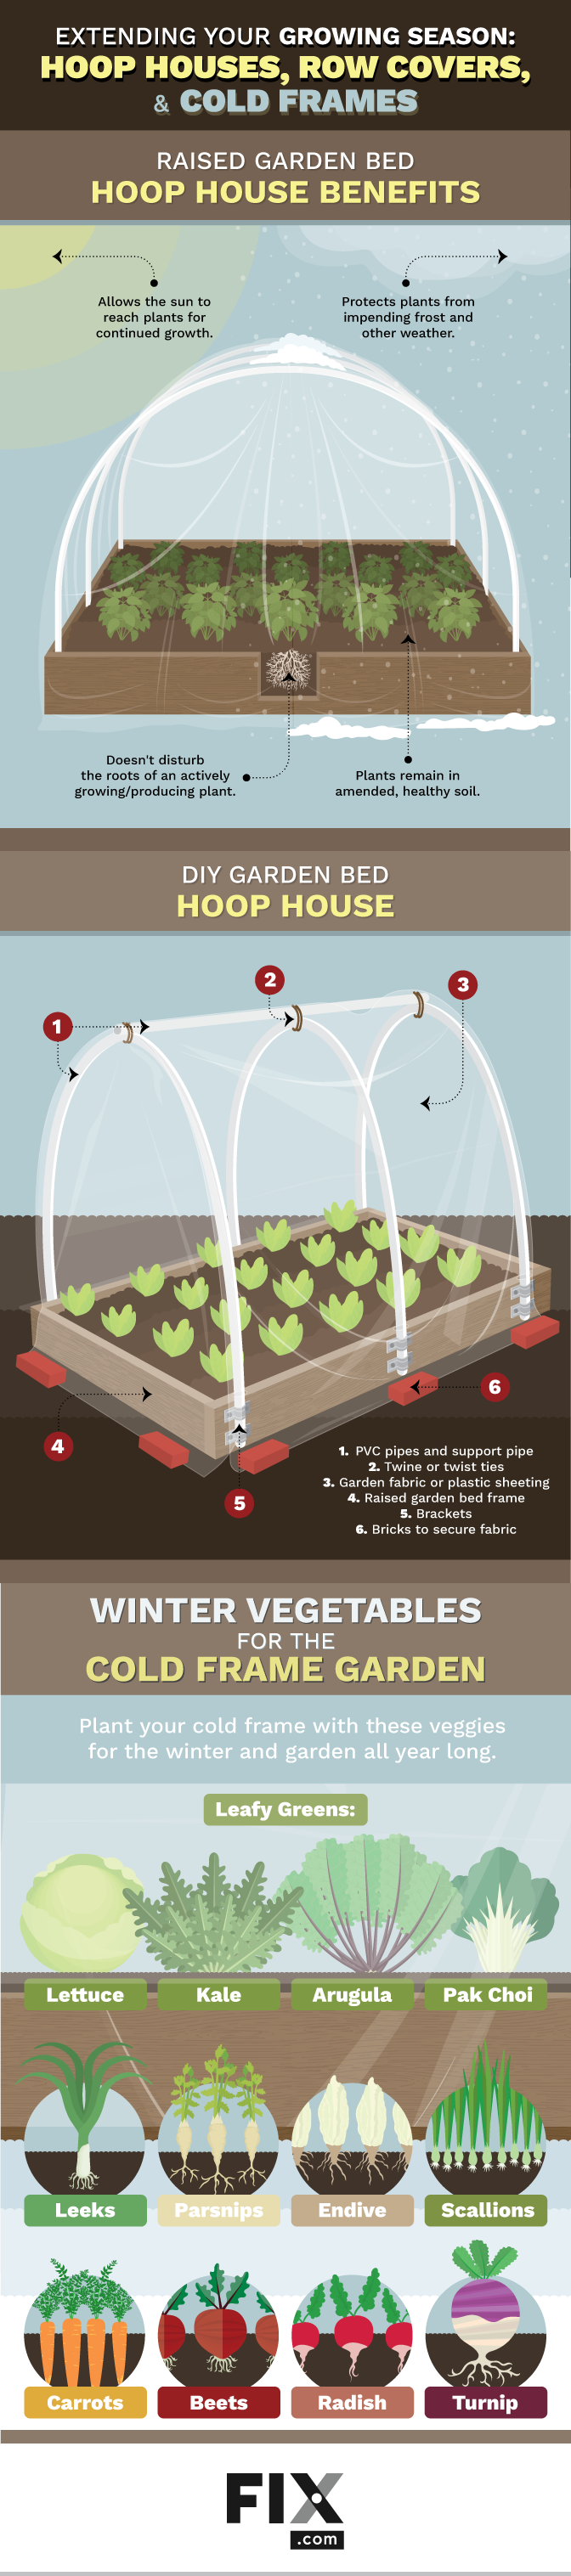 How to grow food year-round